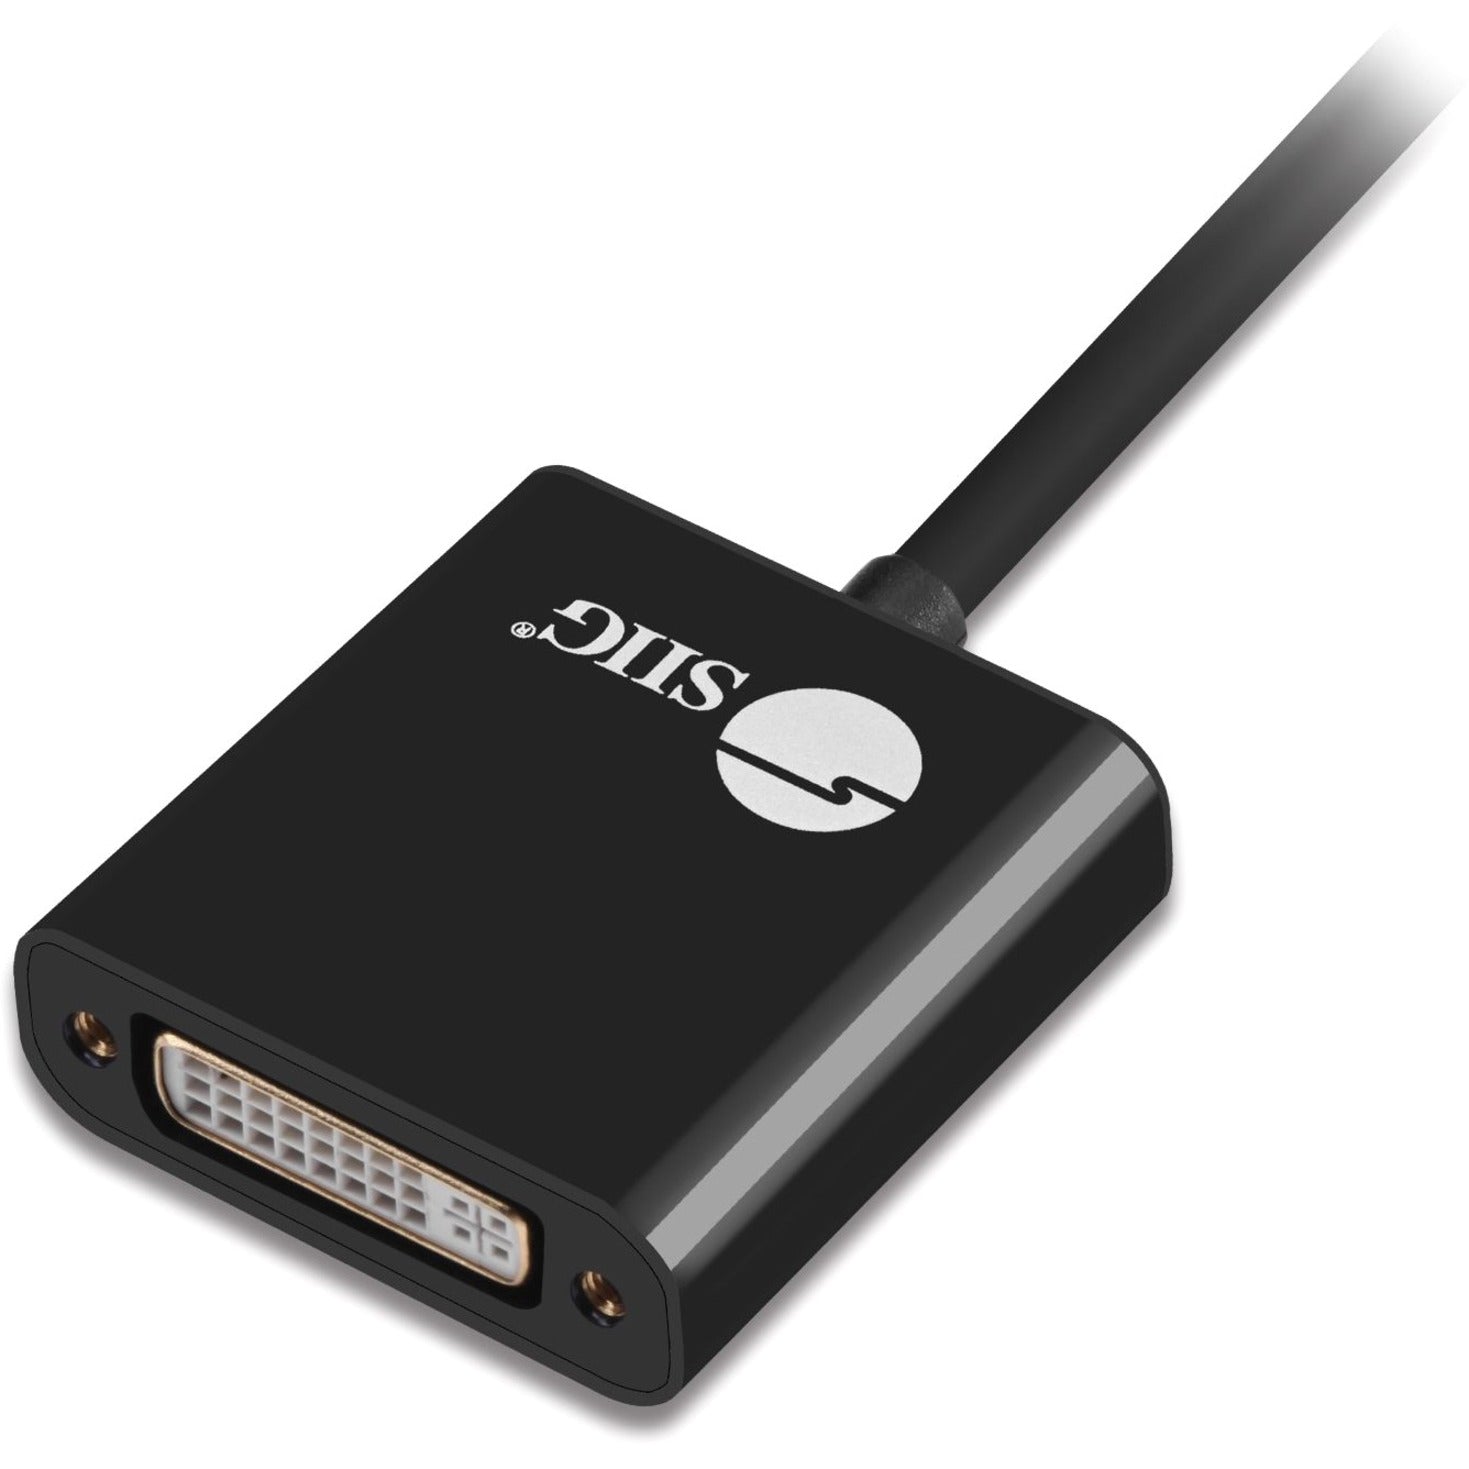 SIIG CB-DP1X12-S1 Mini DisplayPort to DVI Adapter - Active, Triple Shielded, Plug & Play, Supports 3840 x 2160 Resolution